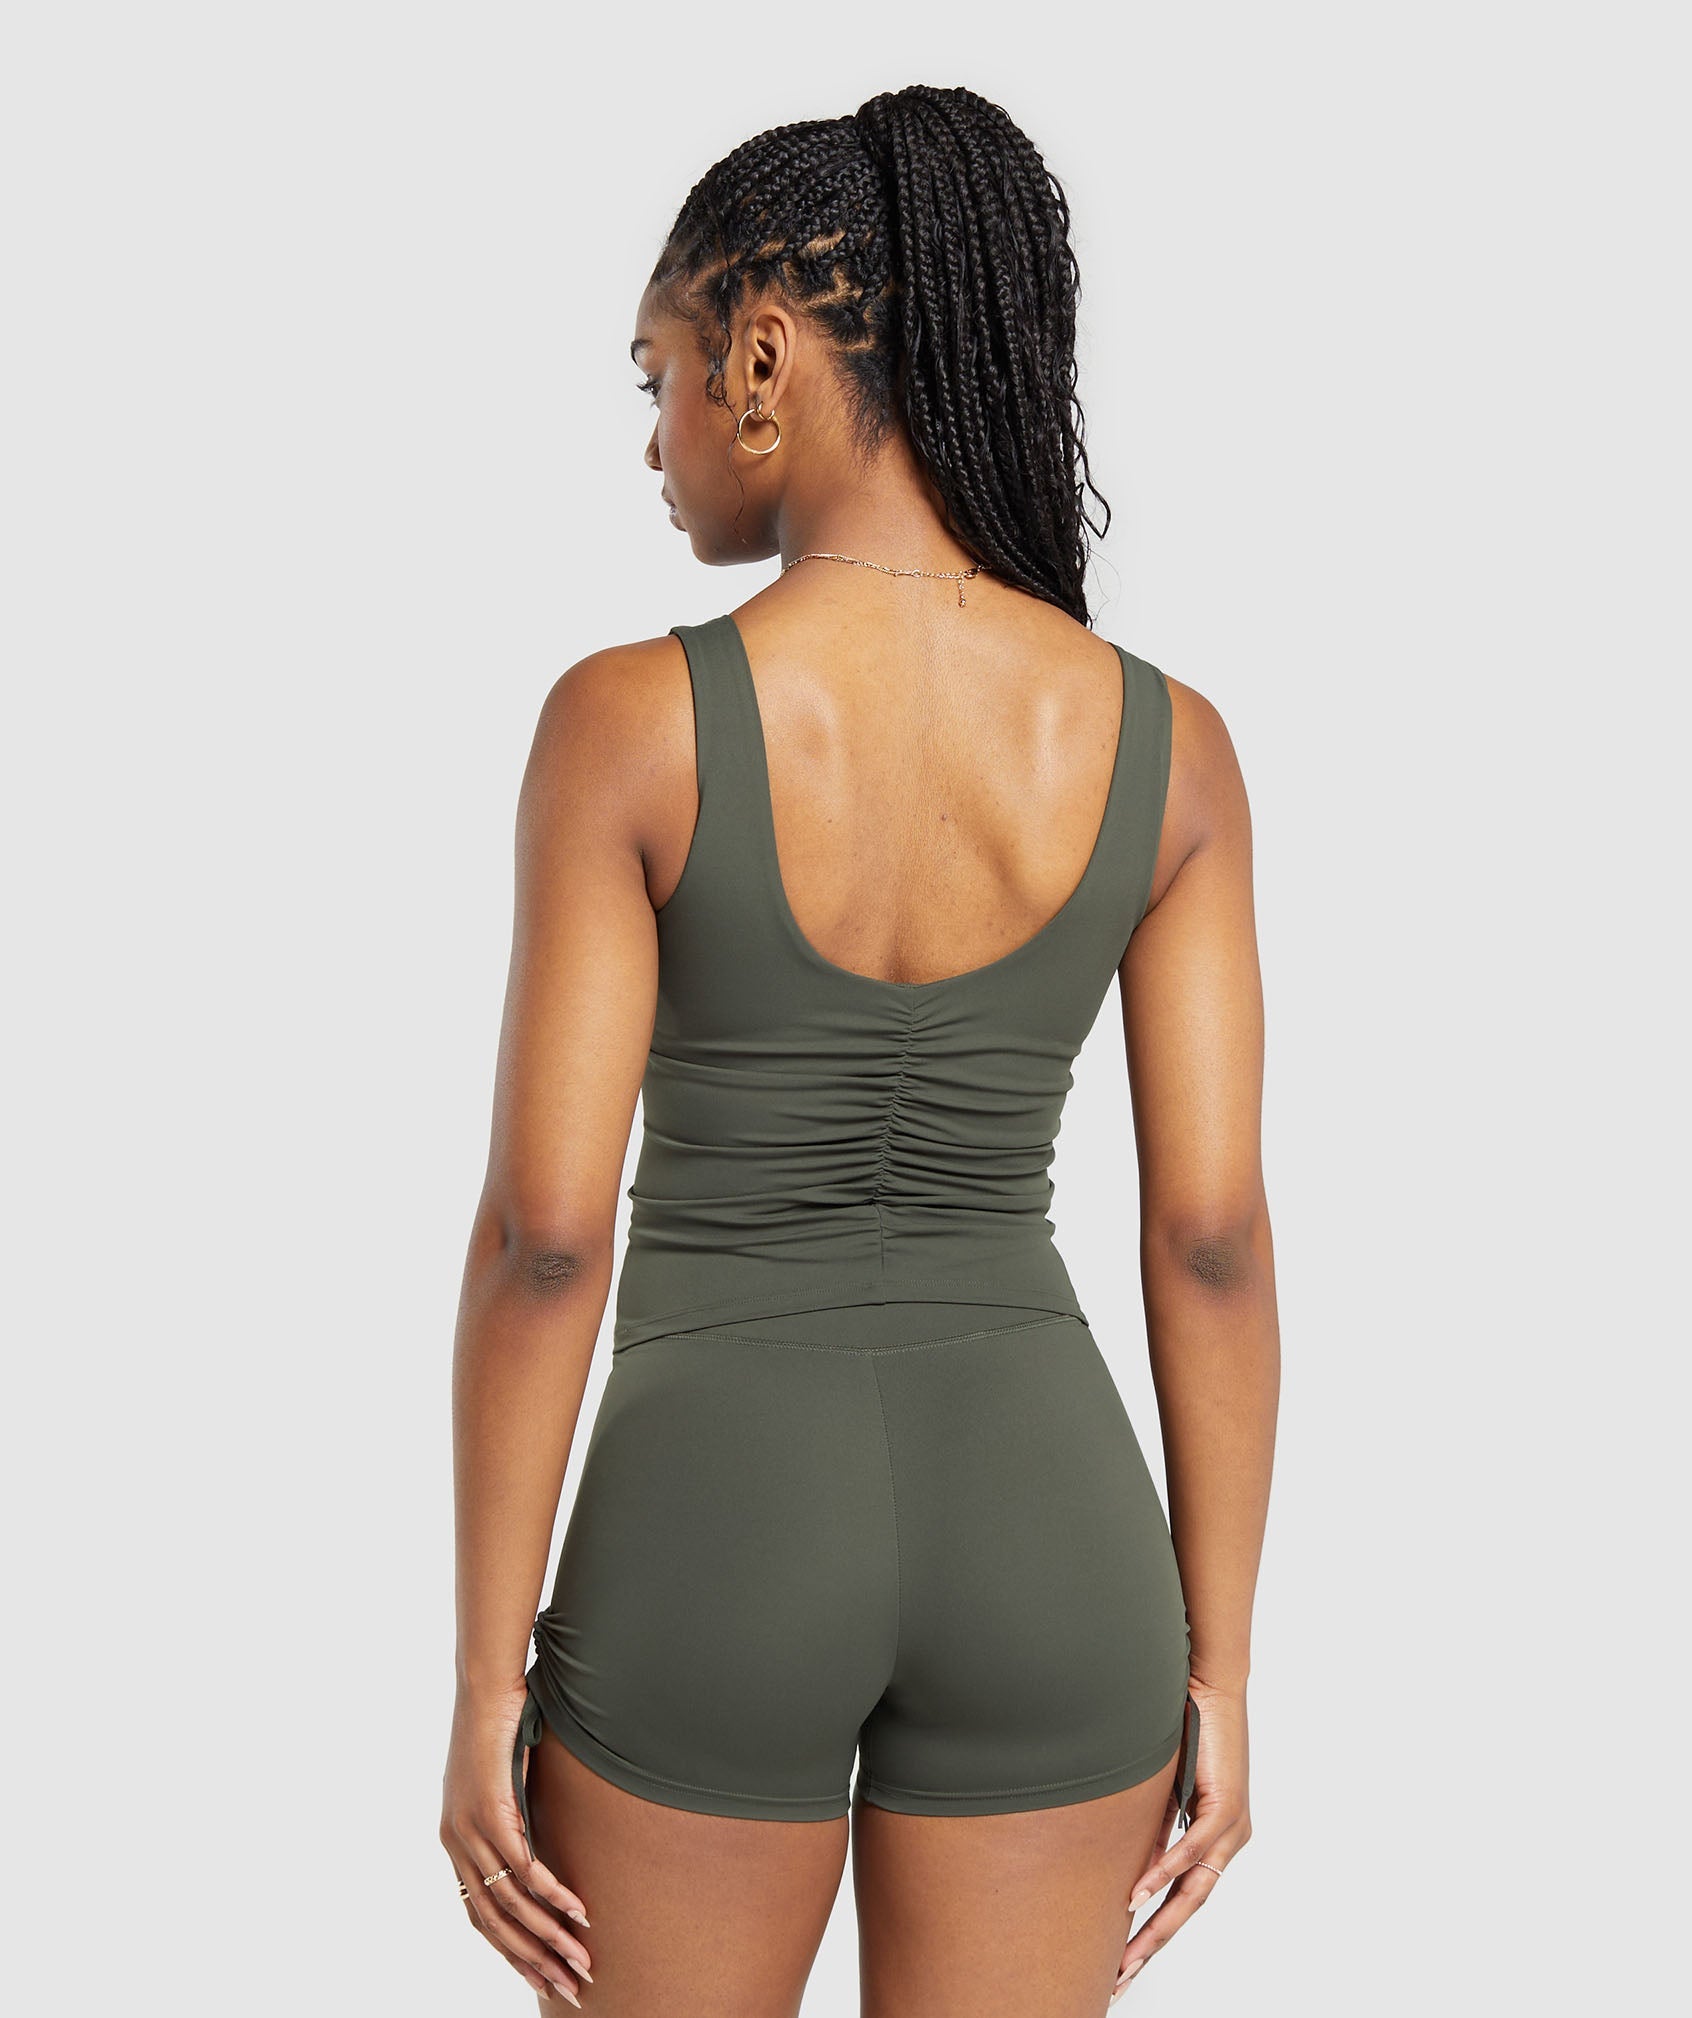 Ruche Tank in Strength Green - view 2